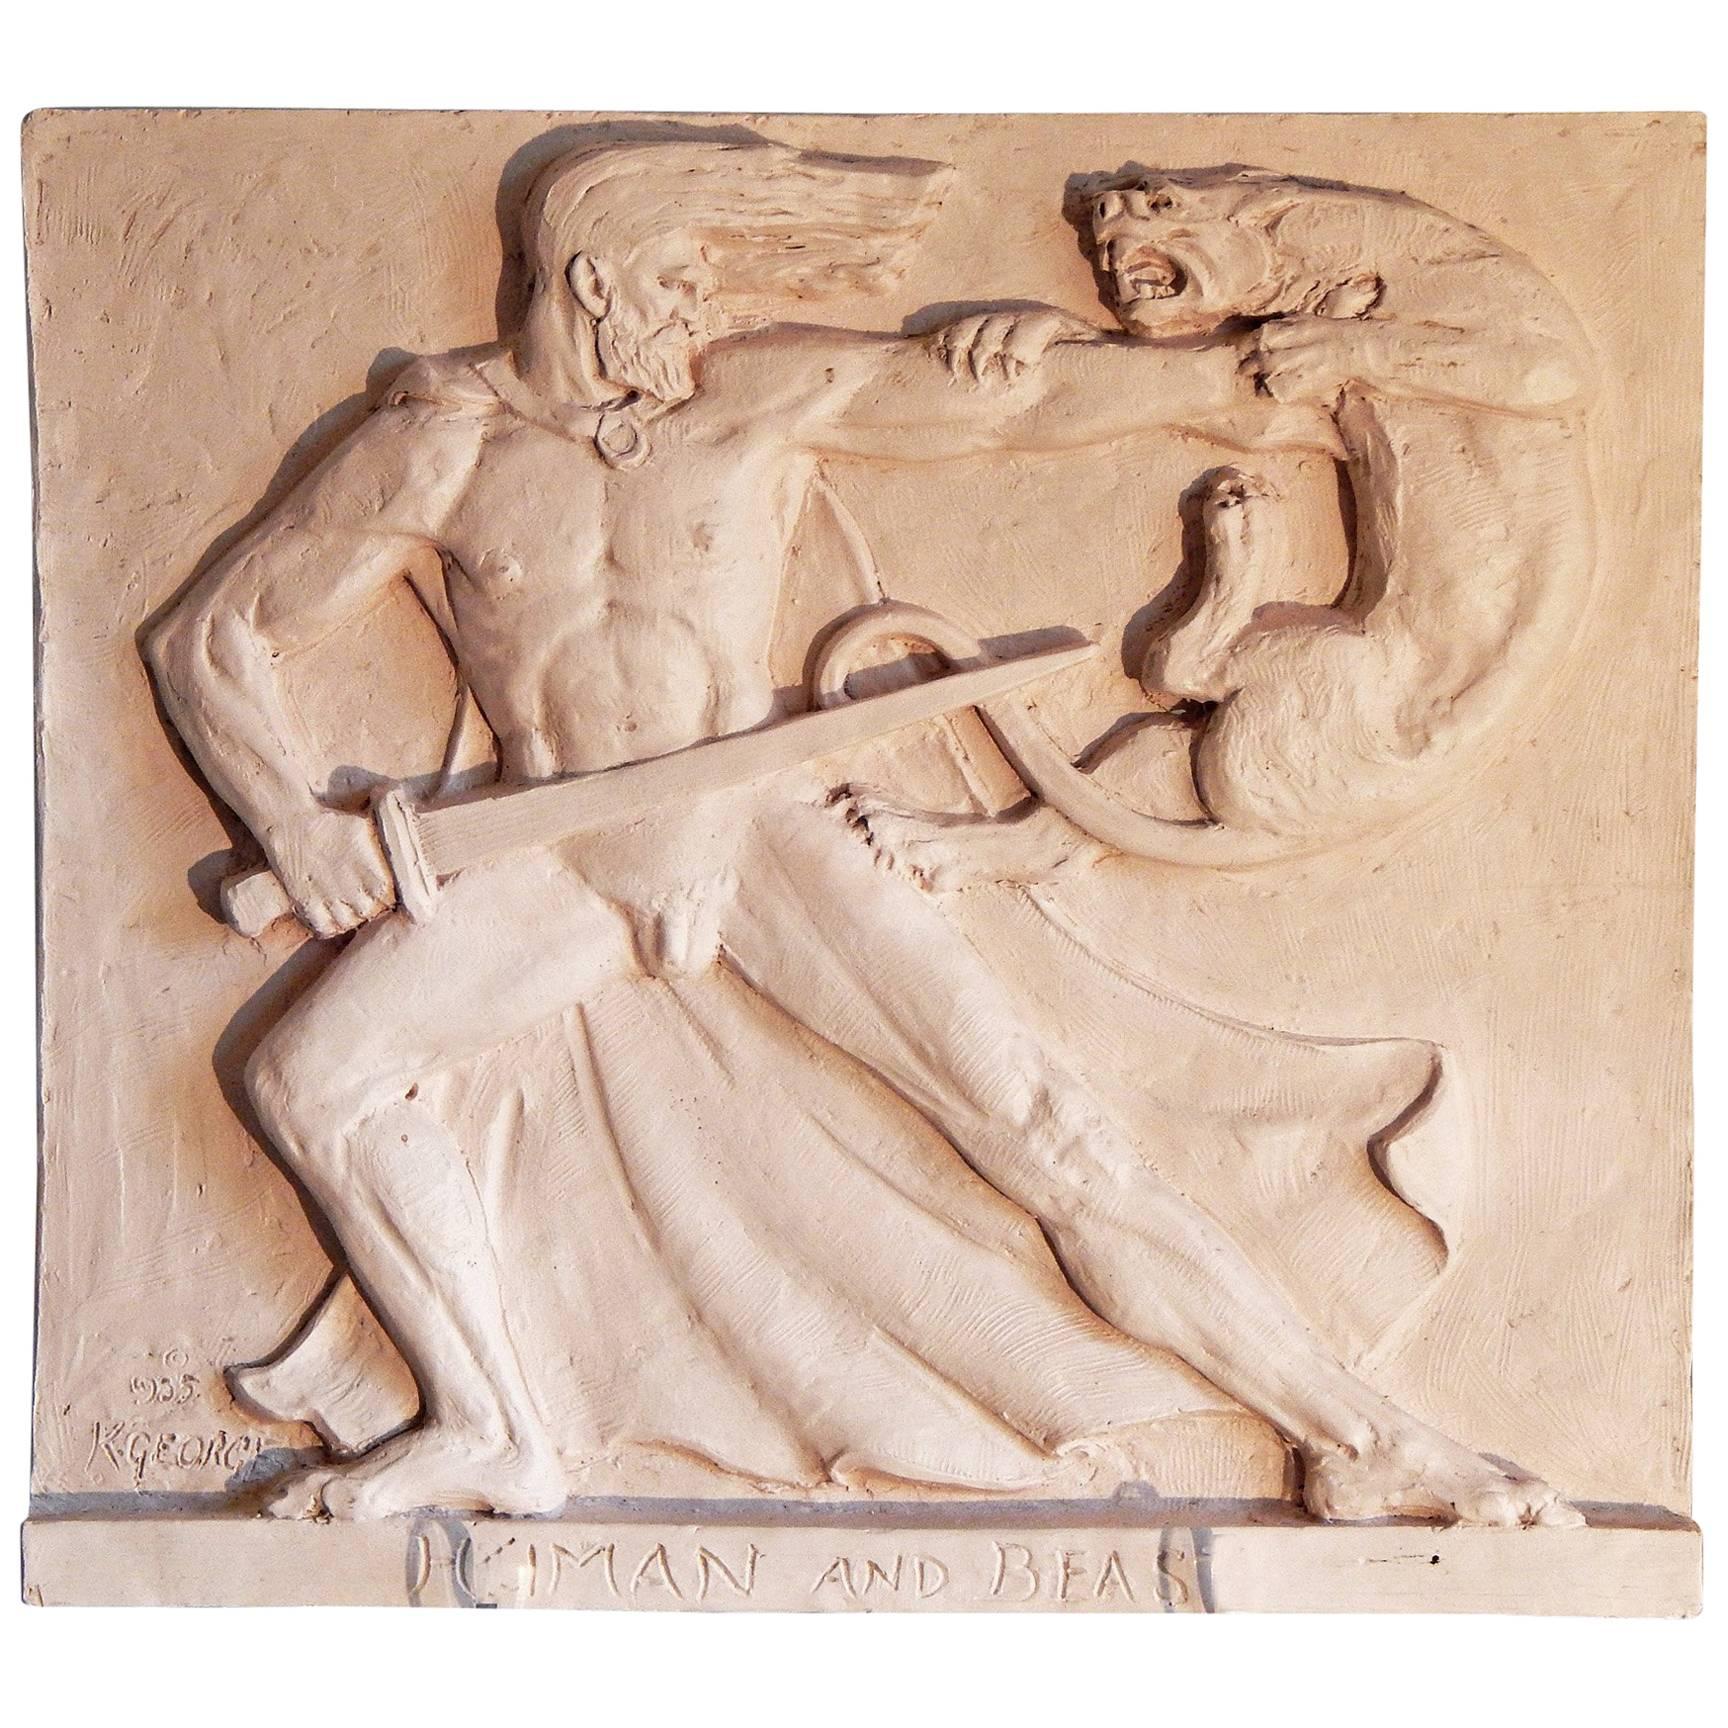 "Hercules and the Nemean Lion" Dramatic Art Deco Sculptural Panel with Nude Male